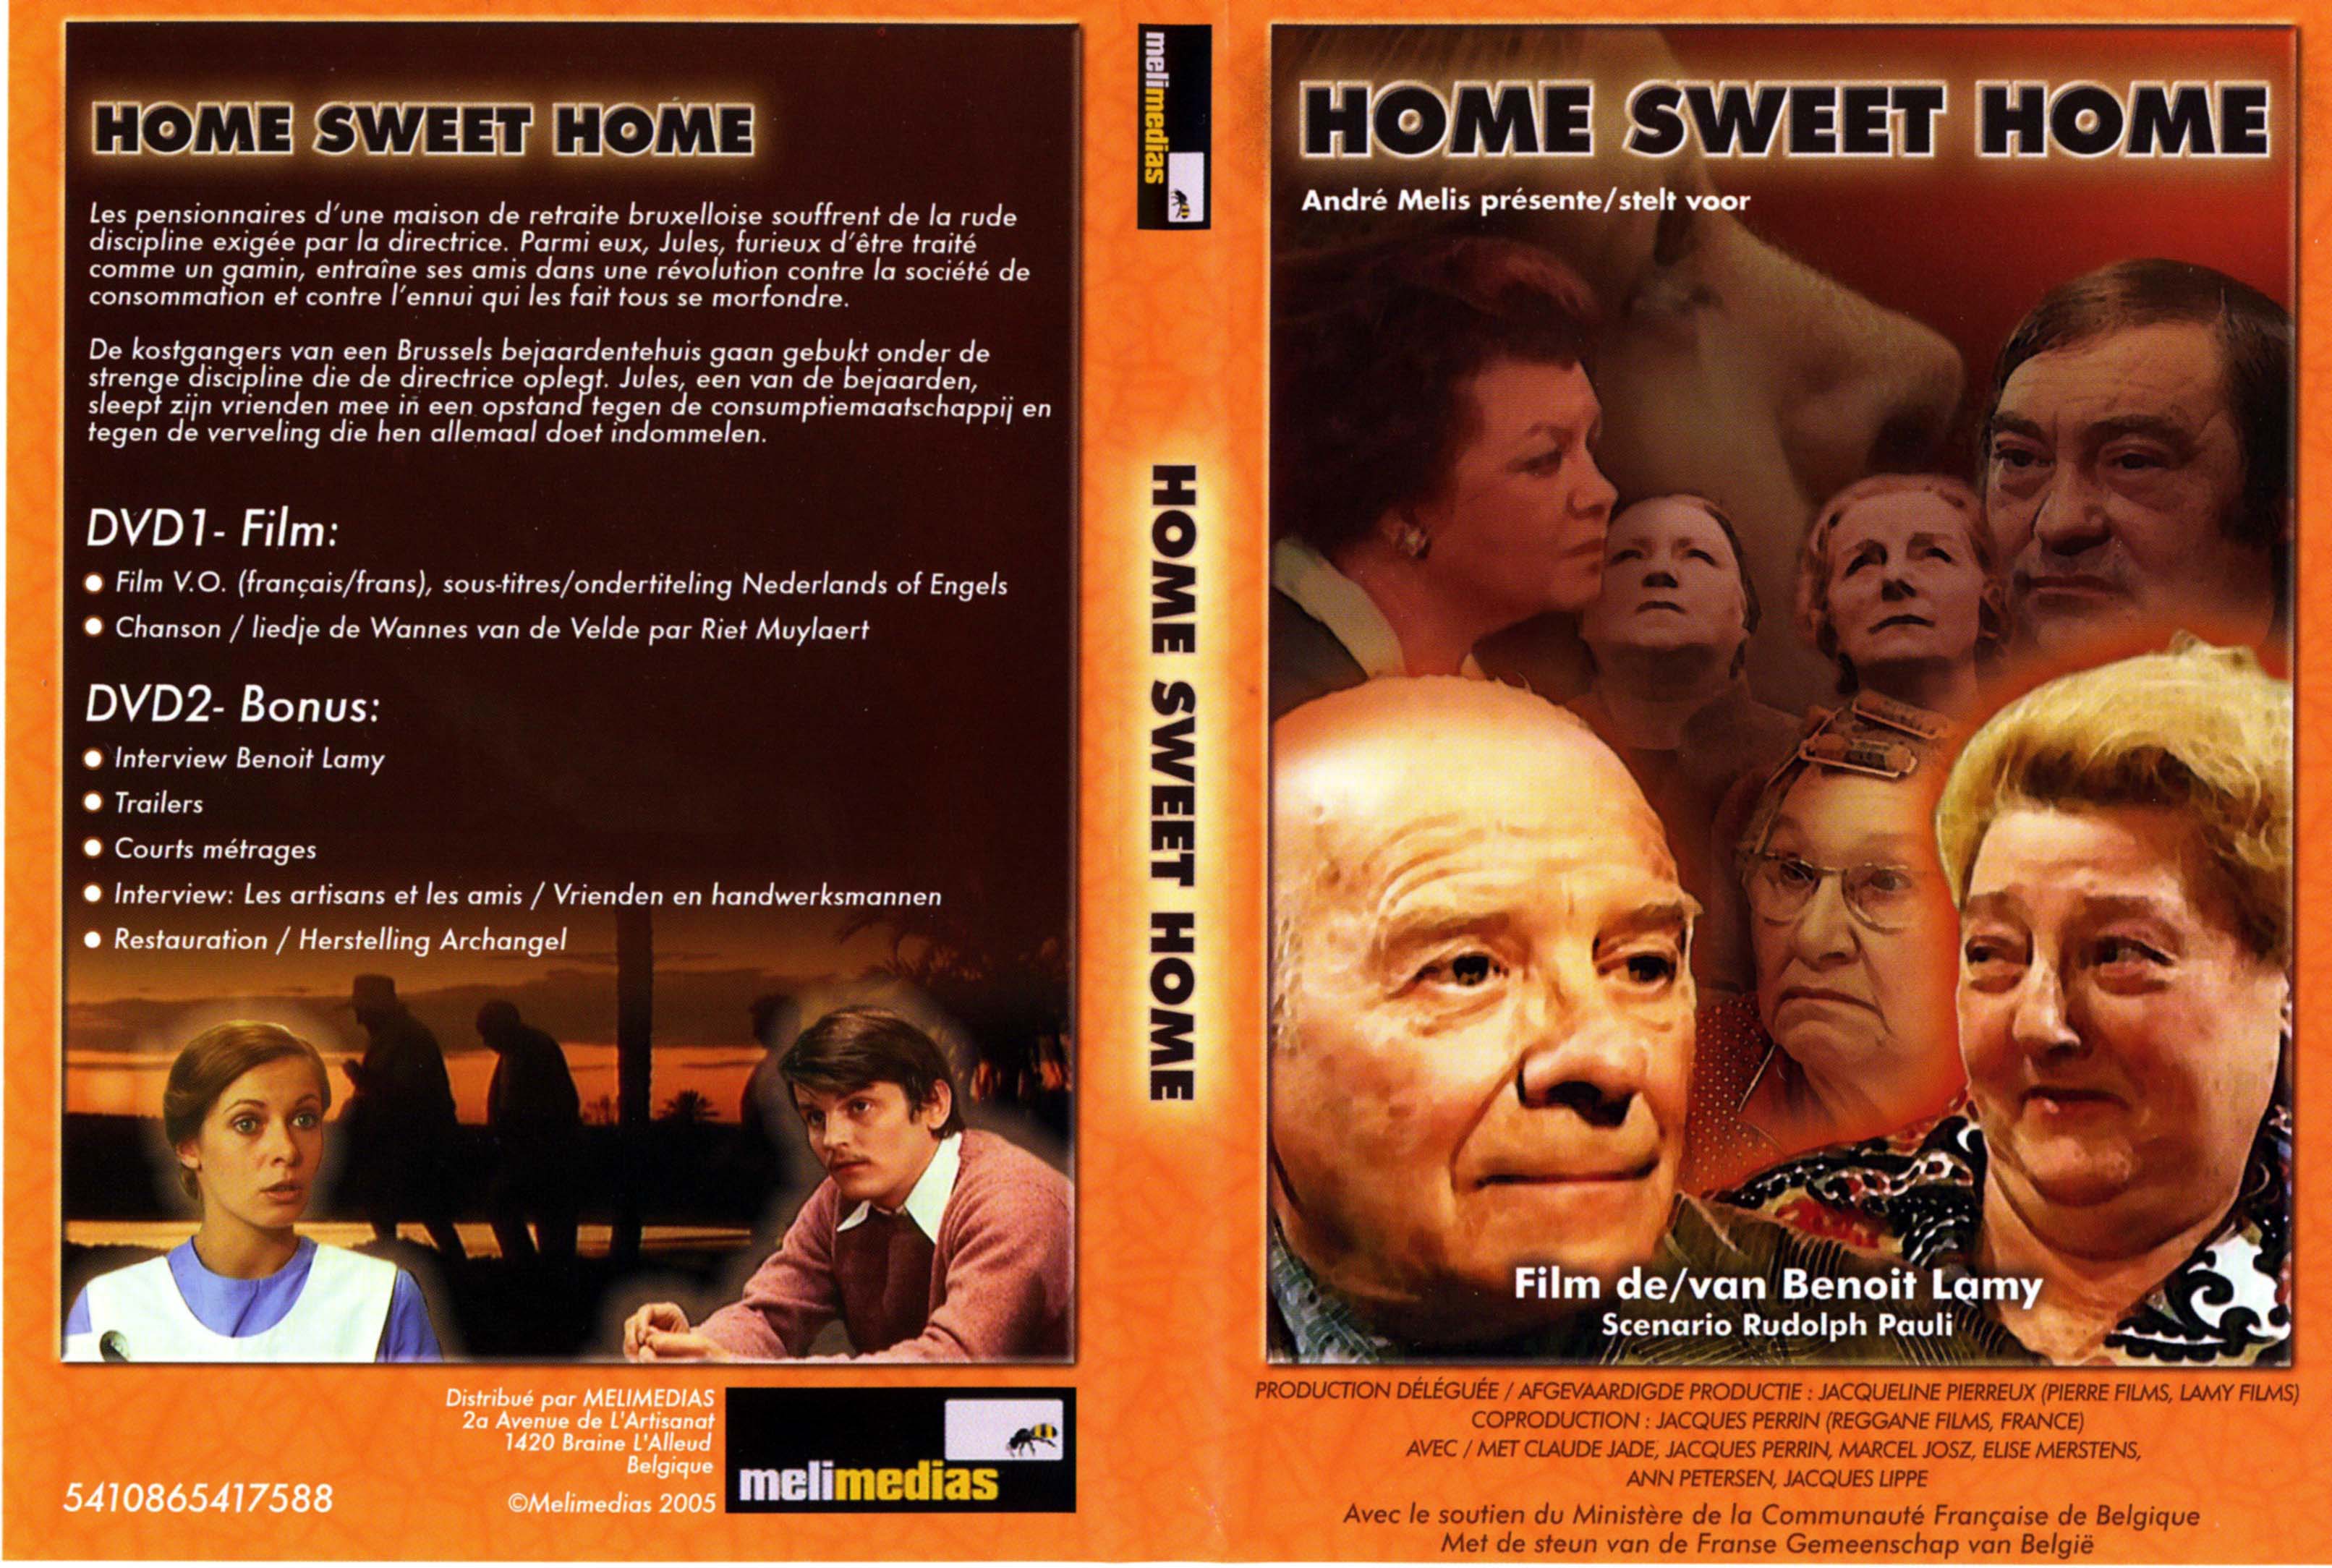 Jaquette DVD Home sweet home